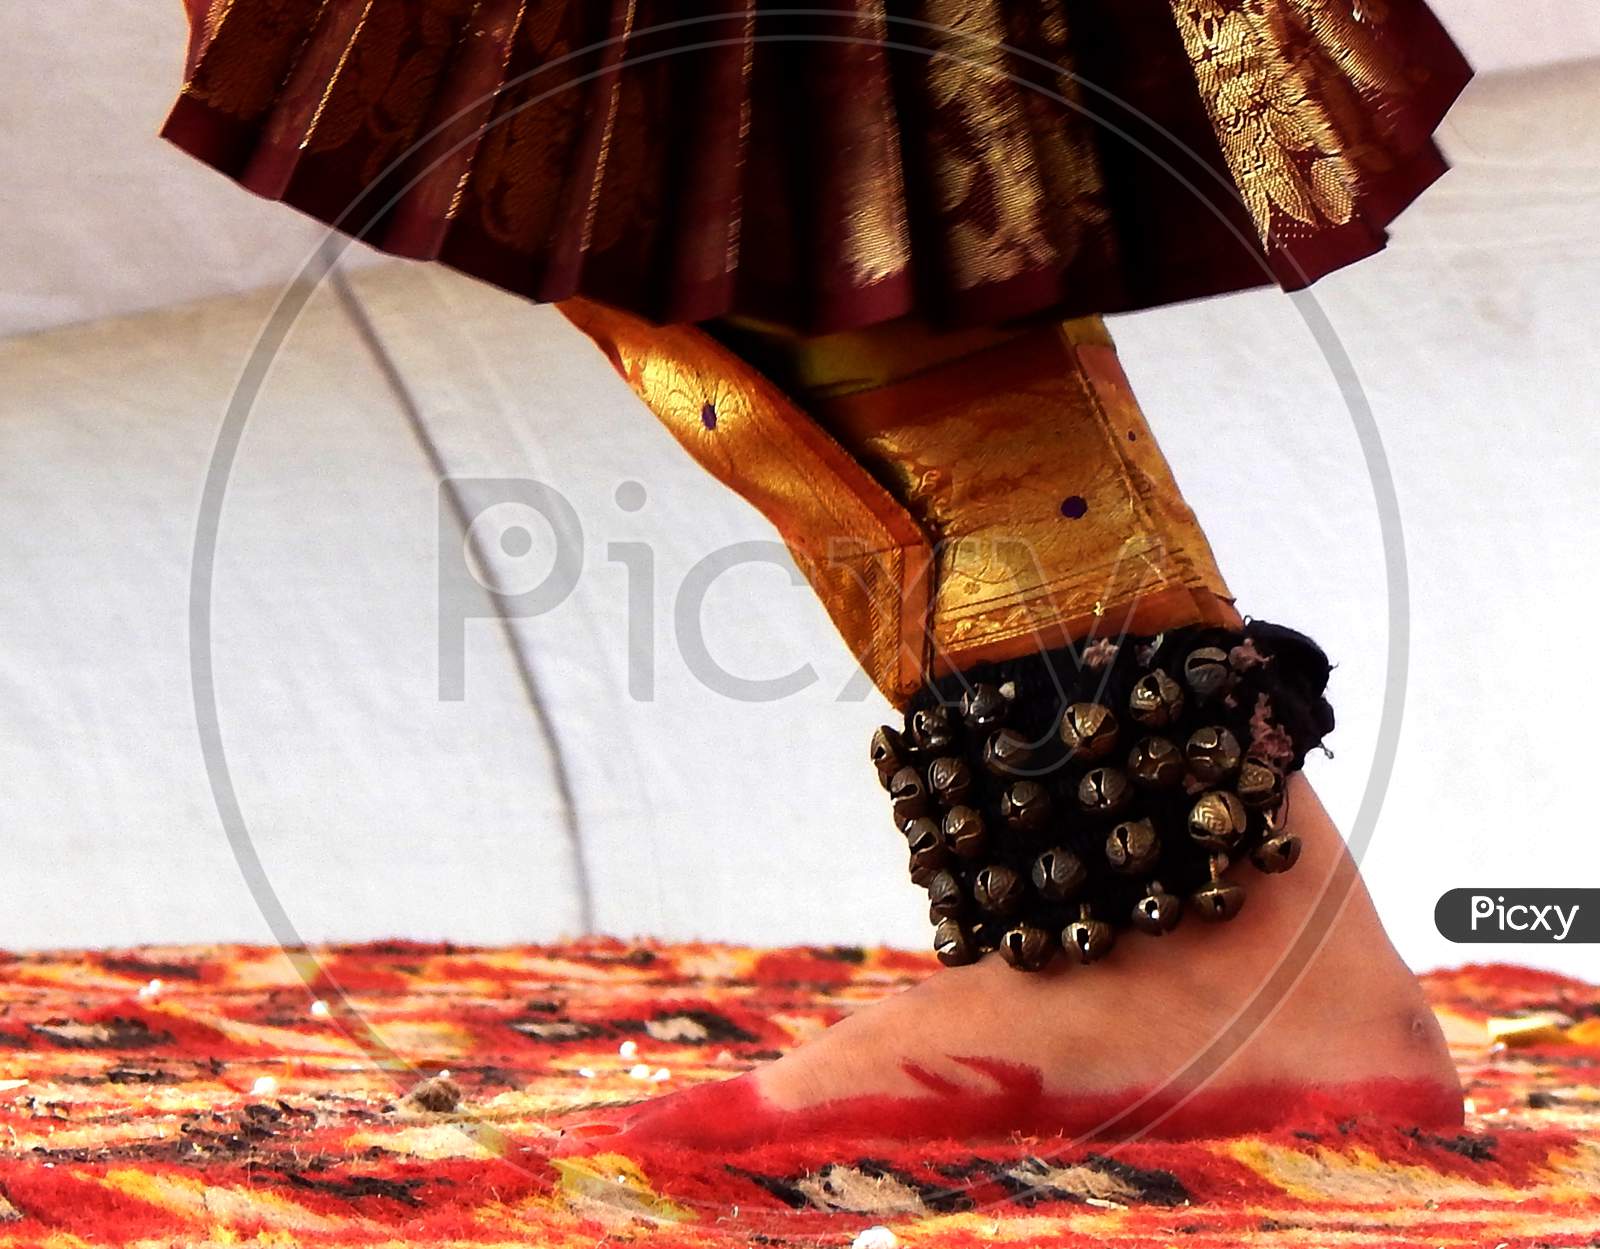 Foot of an Indian Classical Dancer with mehandi and ghungru.